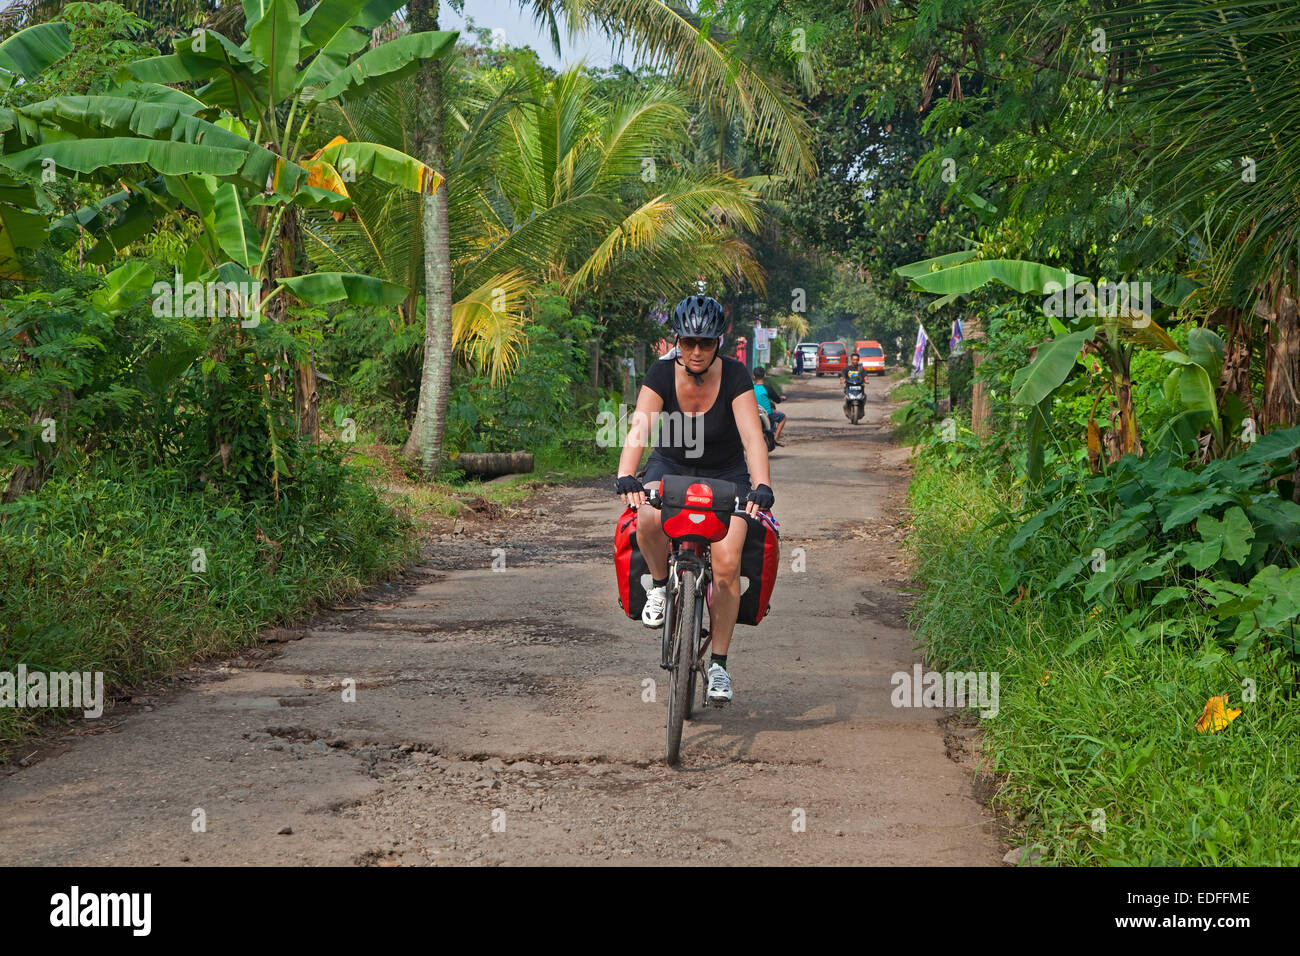 Western tourist cycling along rural country road in the Cianjur Regency, West Java, Indonesia Stock Photo